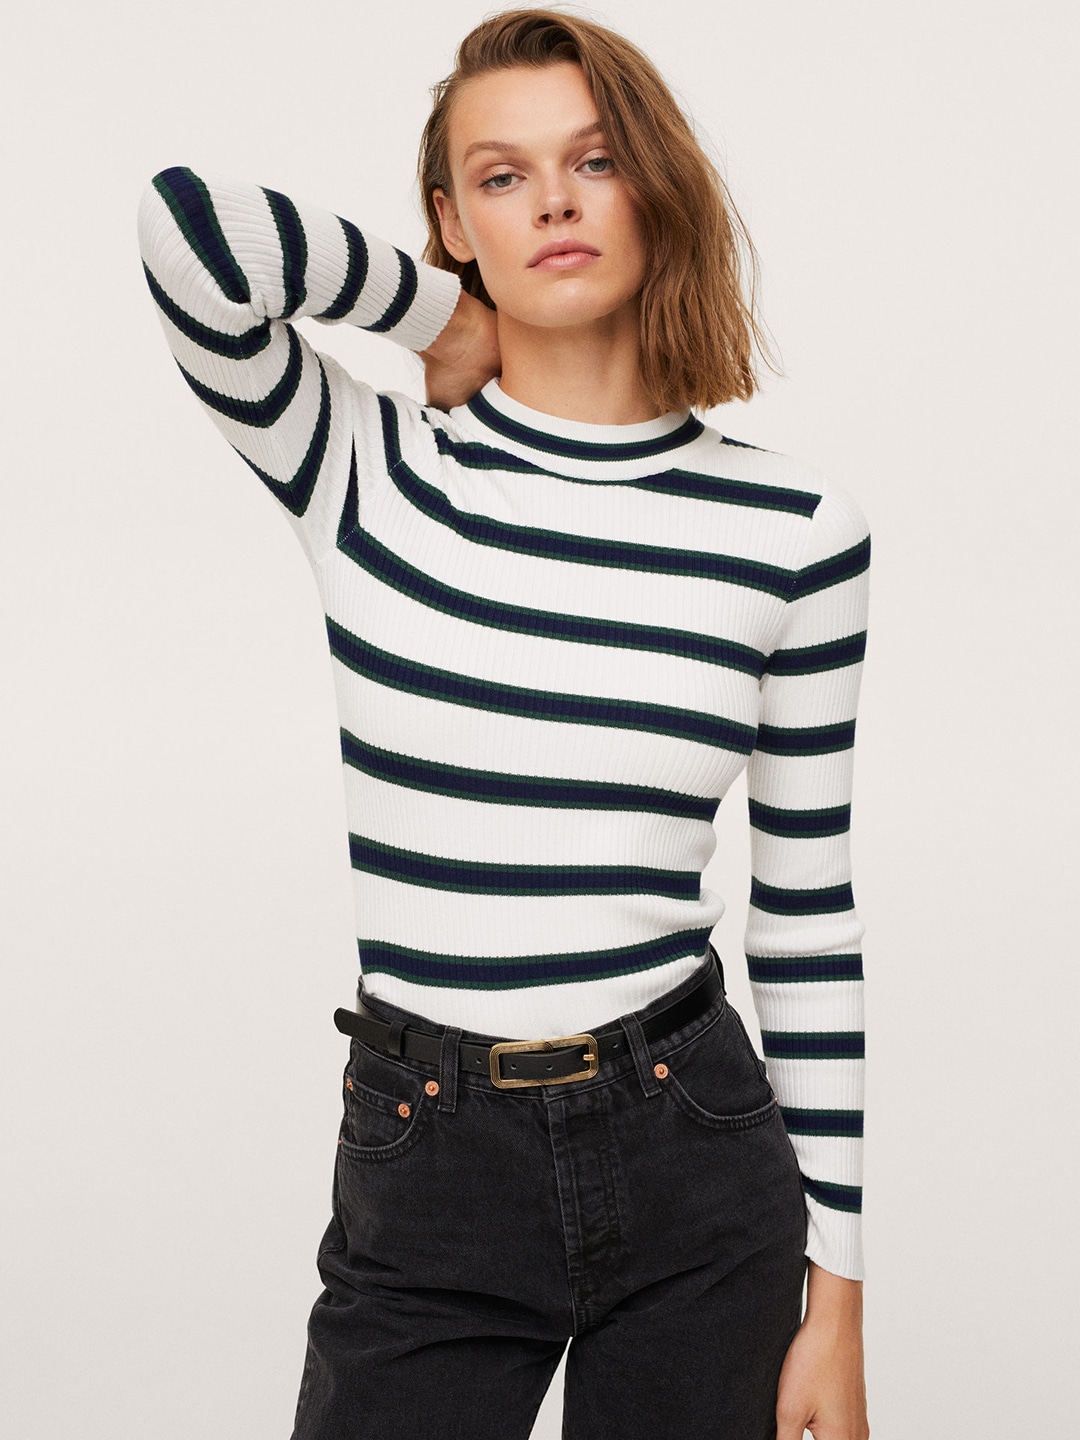 MANGO Women White & Navy Blue Striped Pullover Sweater Price in India